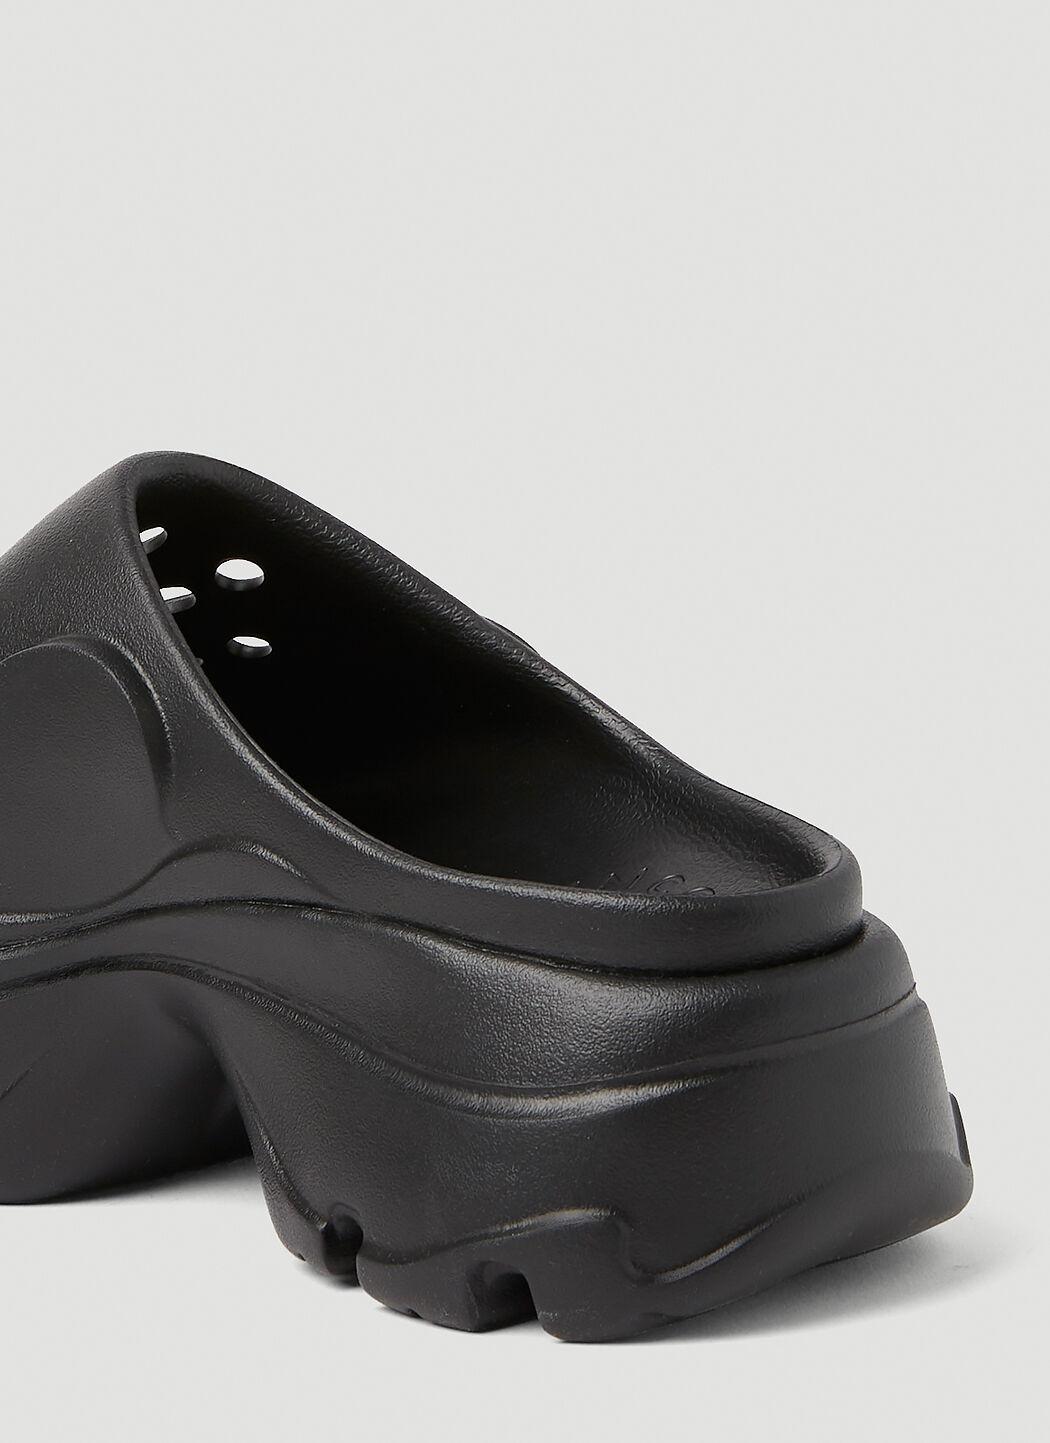 adidas By Stella McCartney Moulded Clogs in Black | Lyst UK